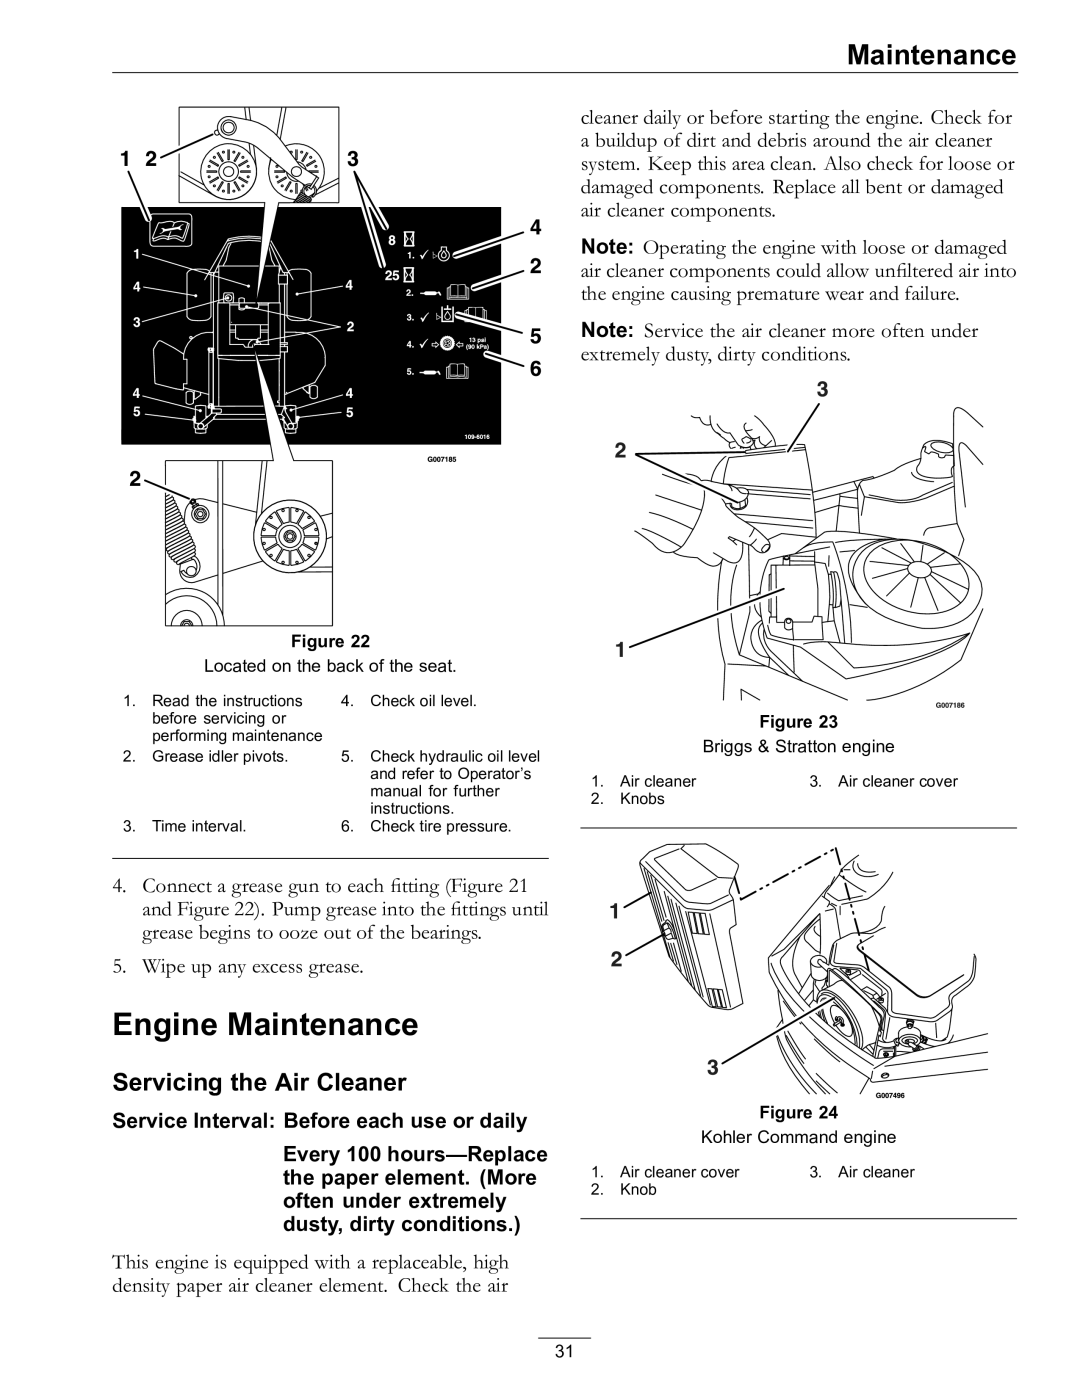 Exmark Lawn Mower manual Engine Maintenance, Servicing the Air Cleaner 